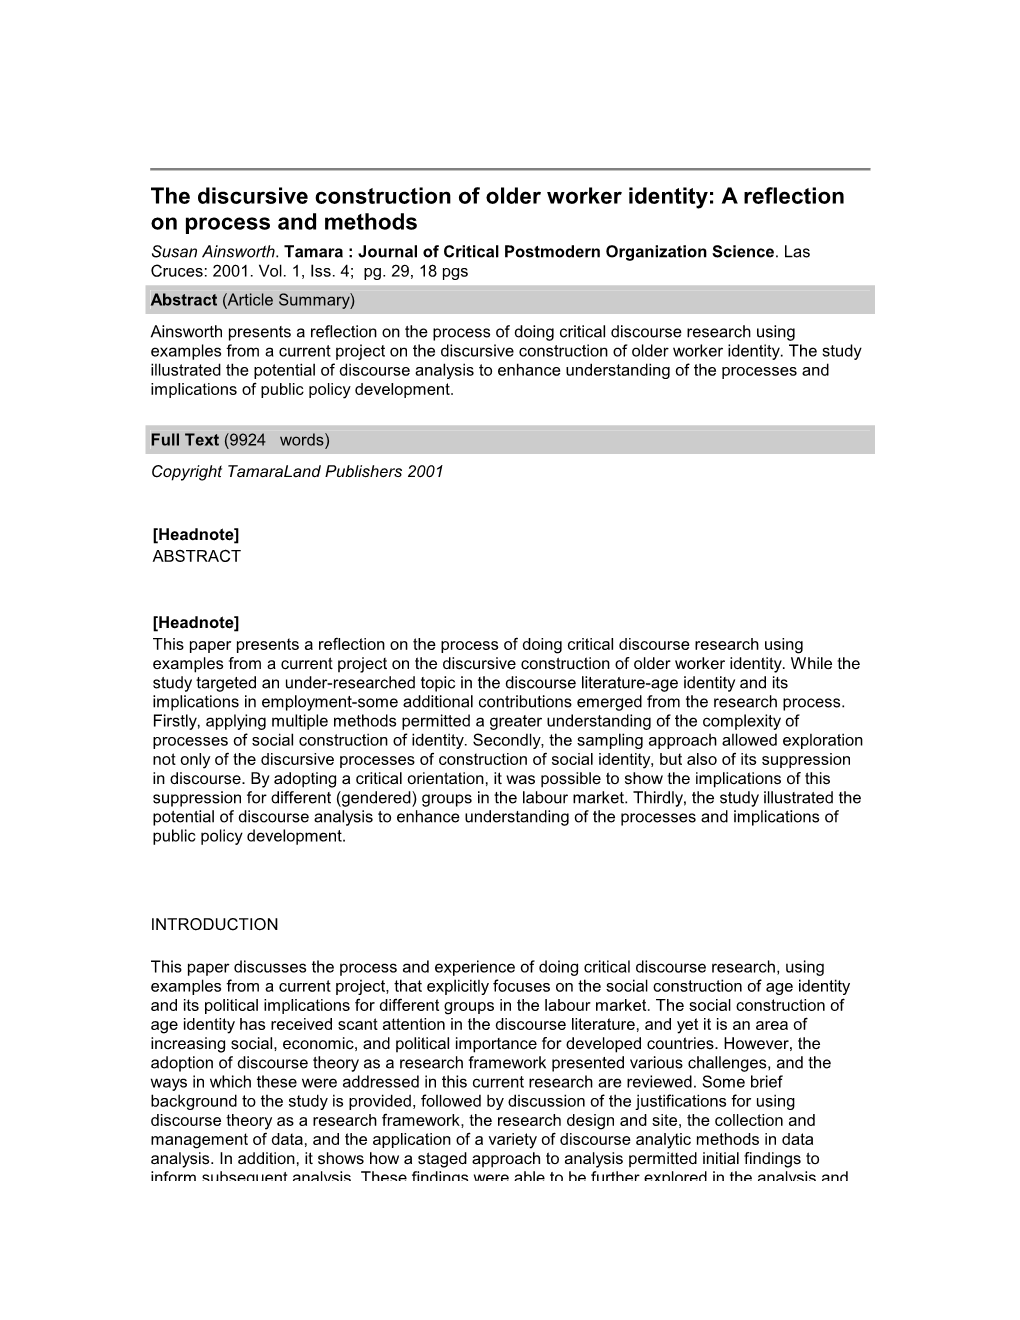 The Discursive Construction of Older Worker Identity: a Reflection on Process and Methods Susan Ainsworth